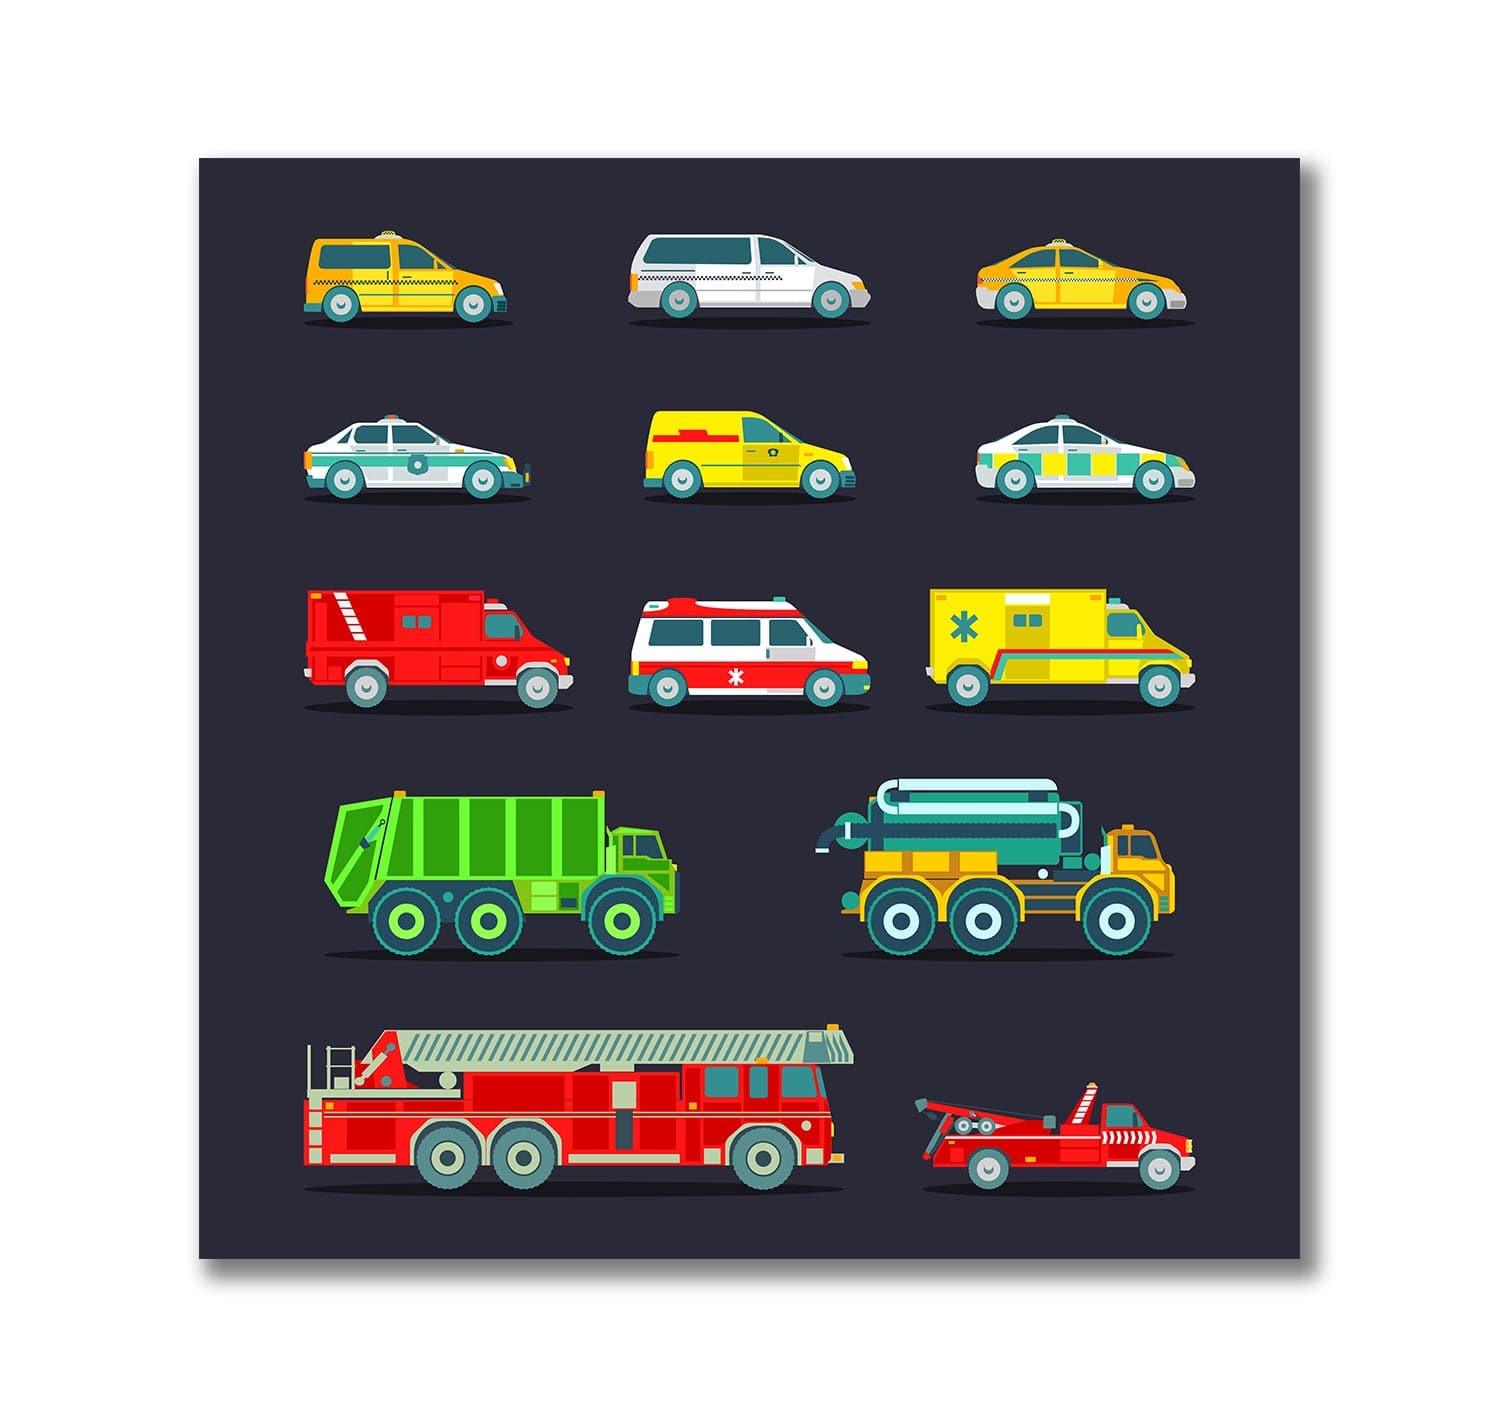 Framed 1 Panel - Kids Room - Cute Emergency Service Cars and Truck